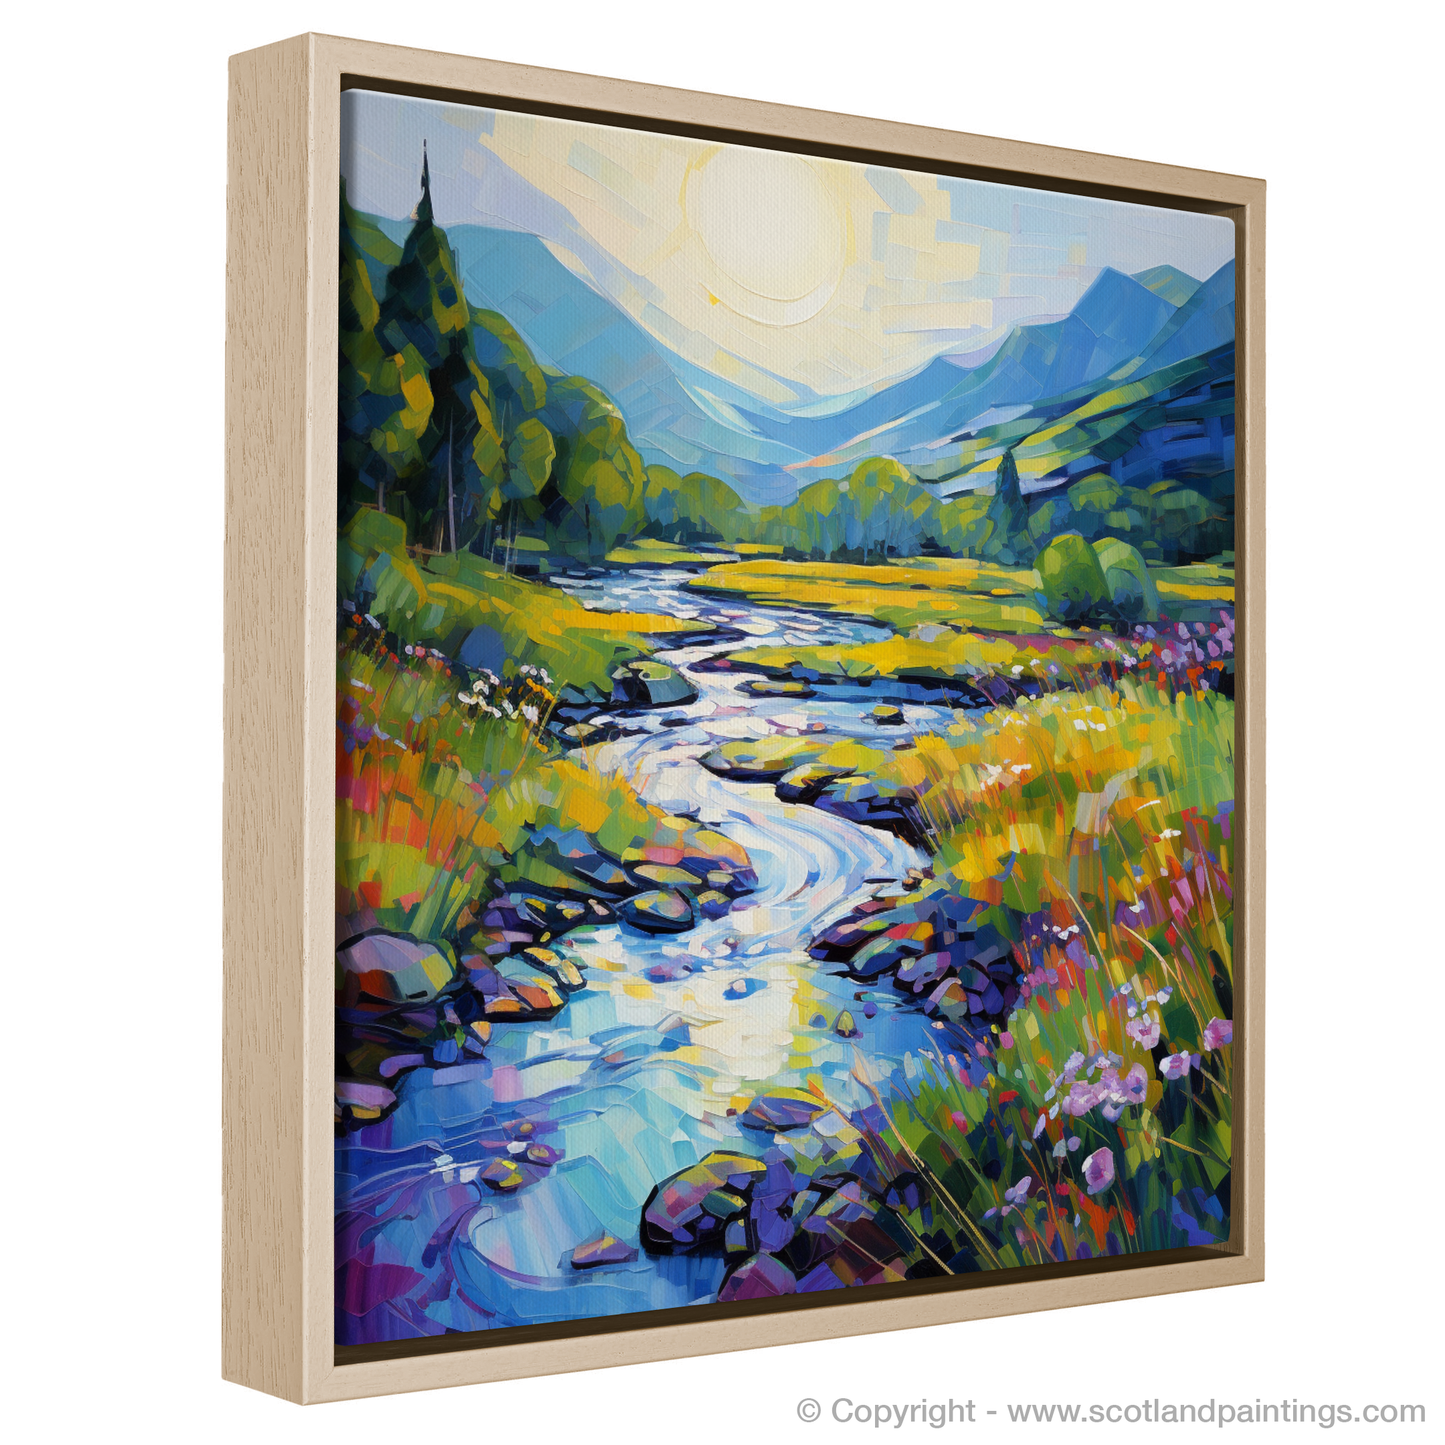 Painting and Art Print of River Orchy, Argyll and Bute in summer entitled "Summer Serenity by River Orchy".